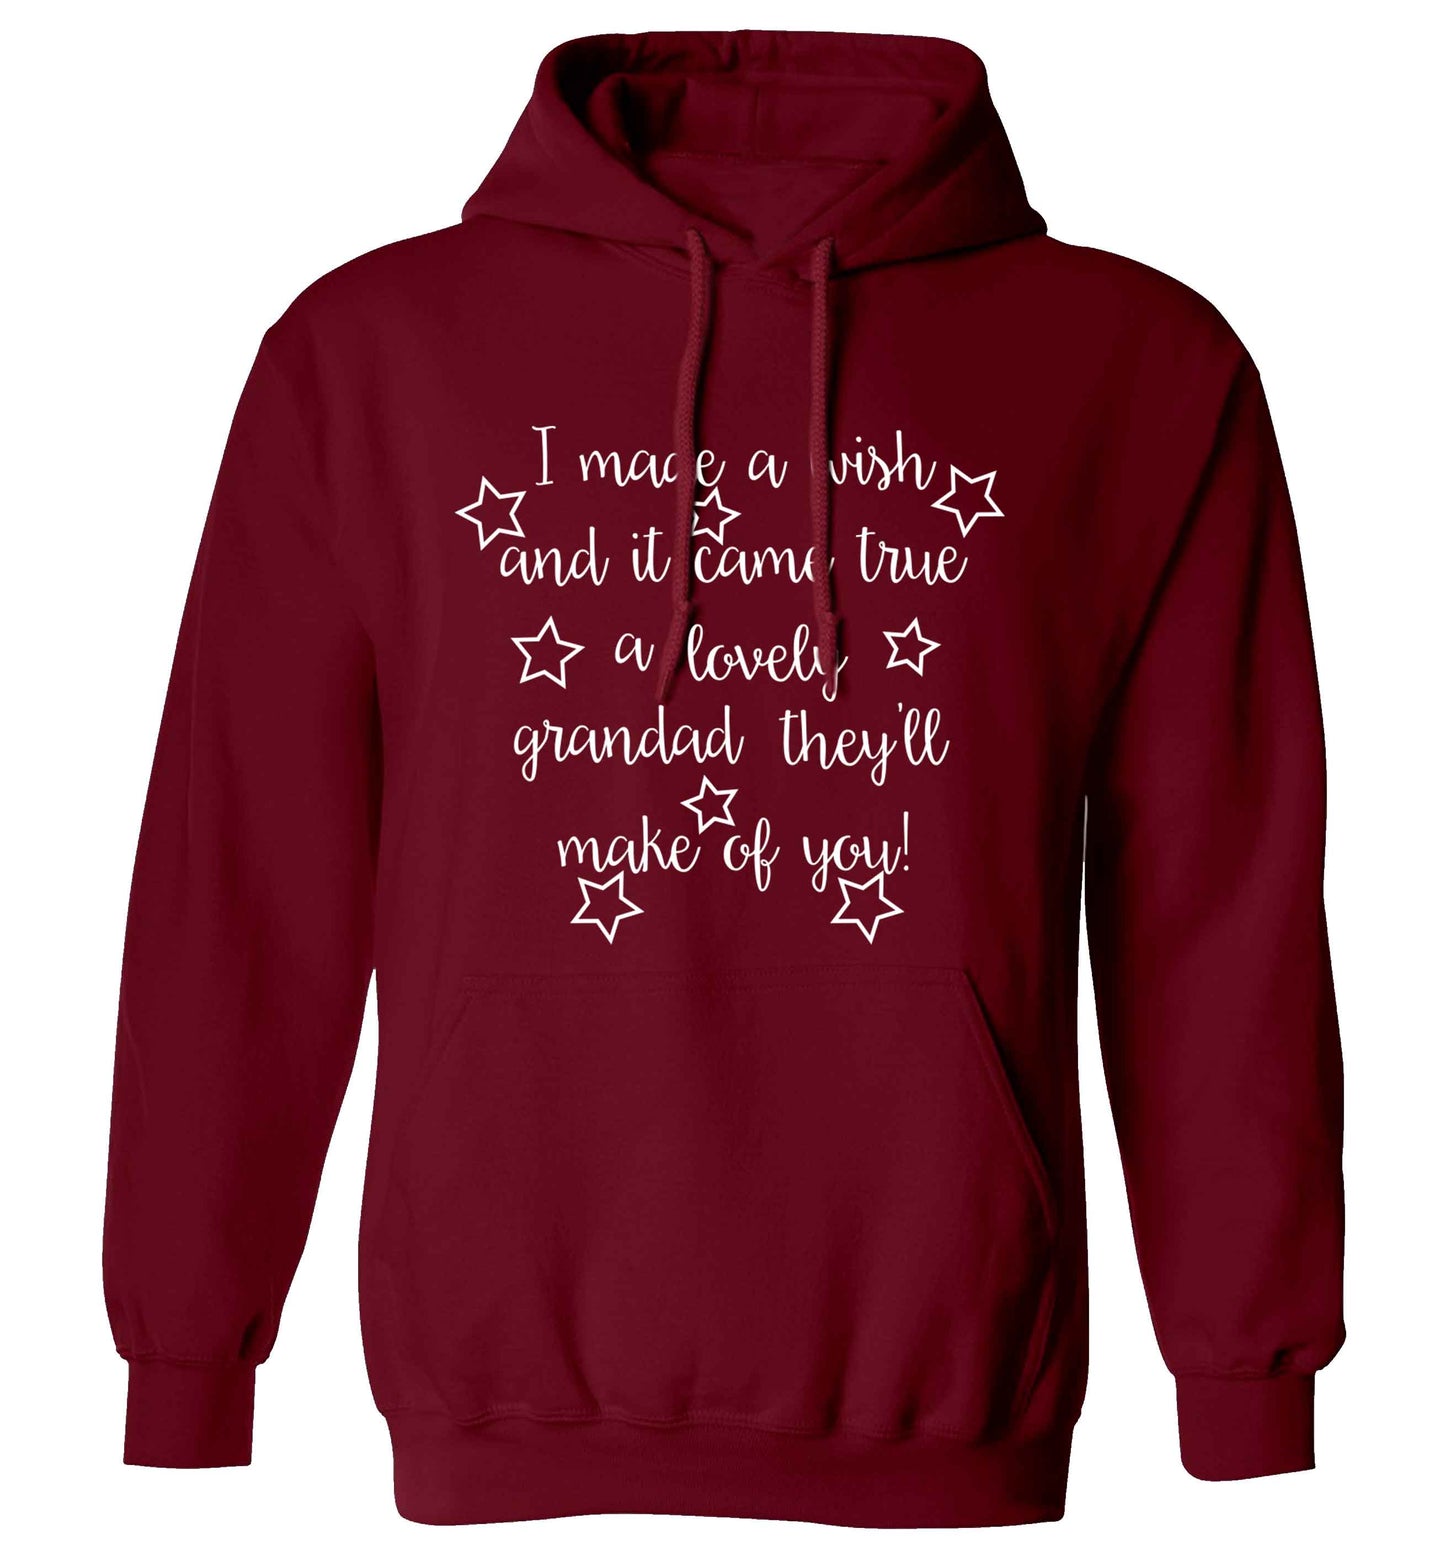 I made a wish and it came true a lovely grandad they'll make of you! adults unisex maroon hoodie 2XL